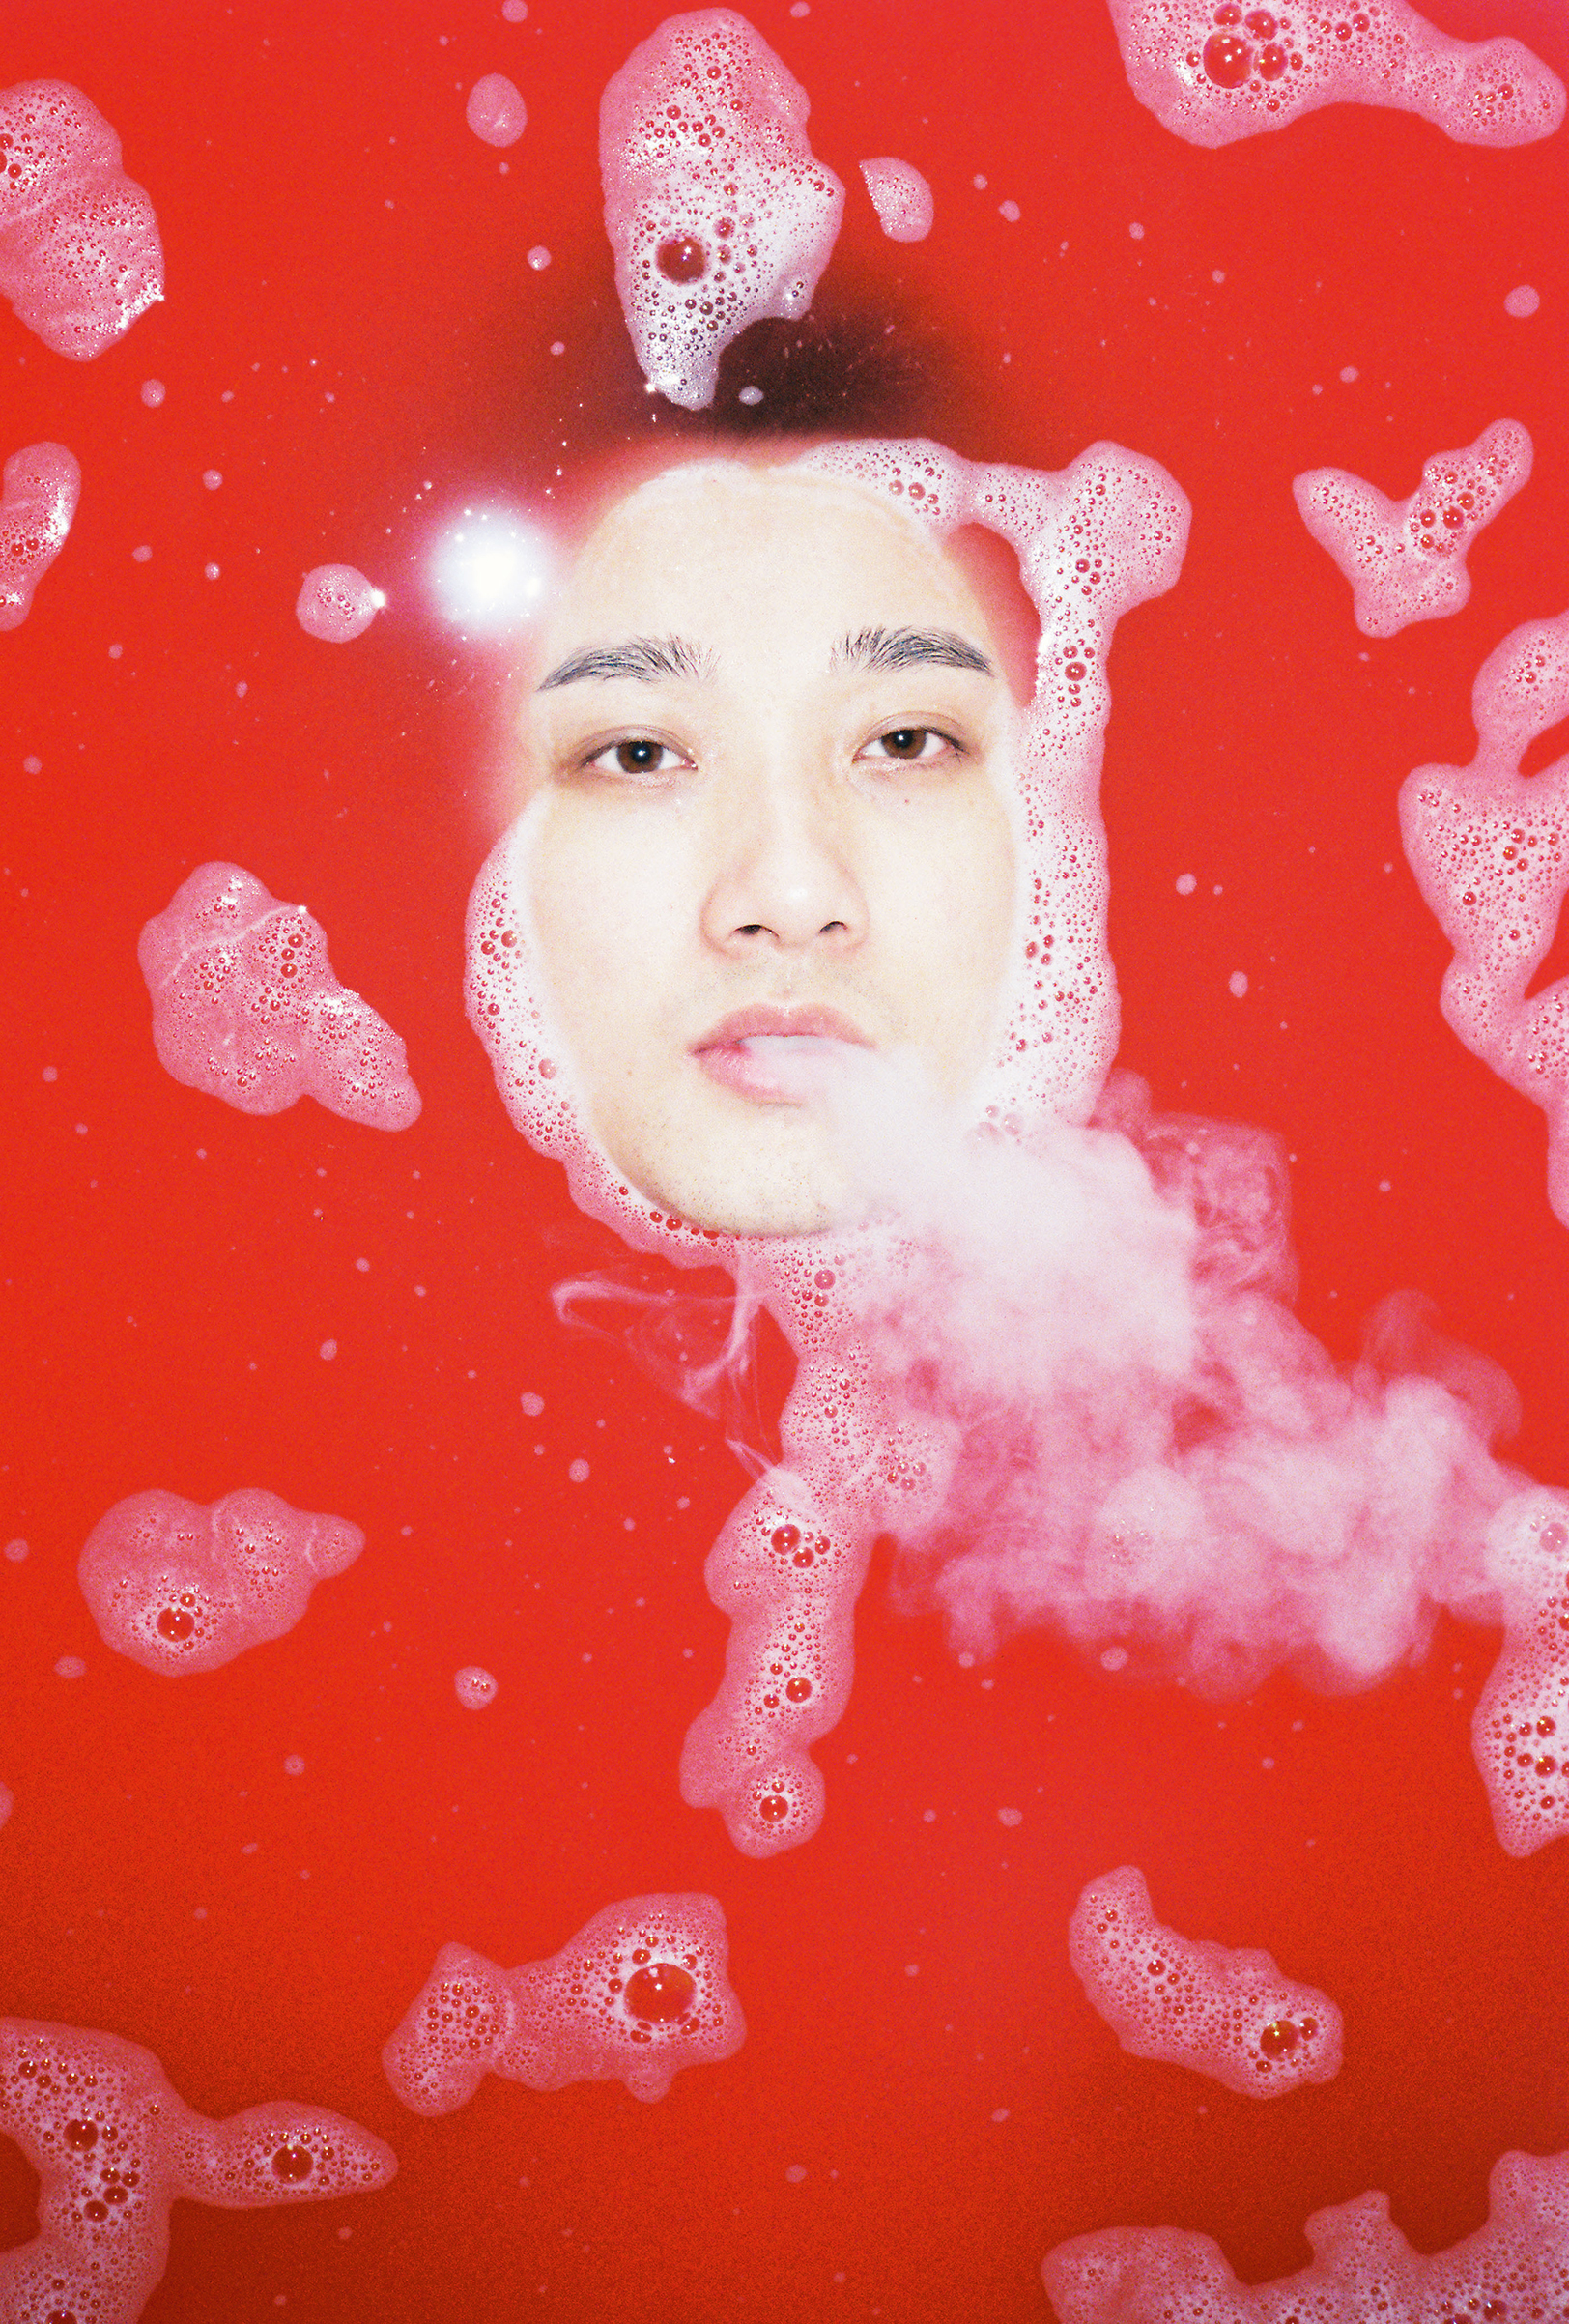 Untitled by Ren Hang.